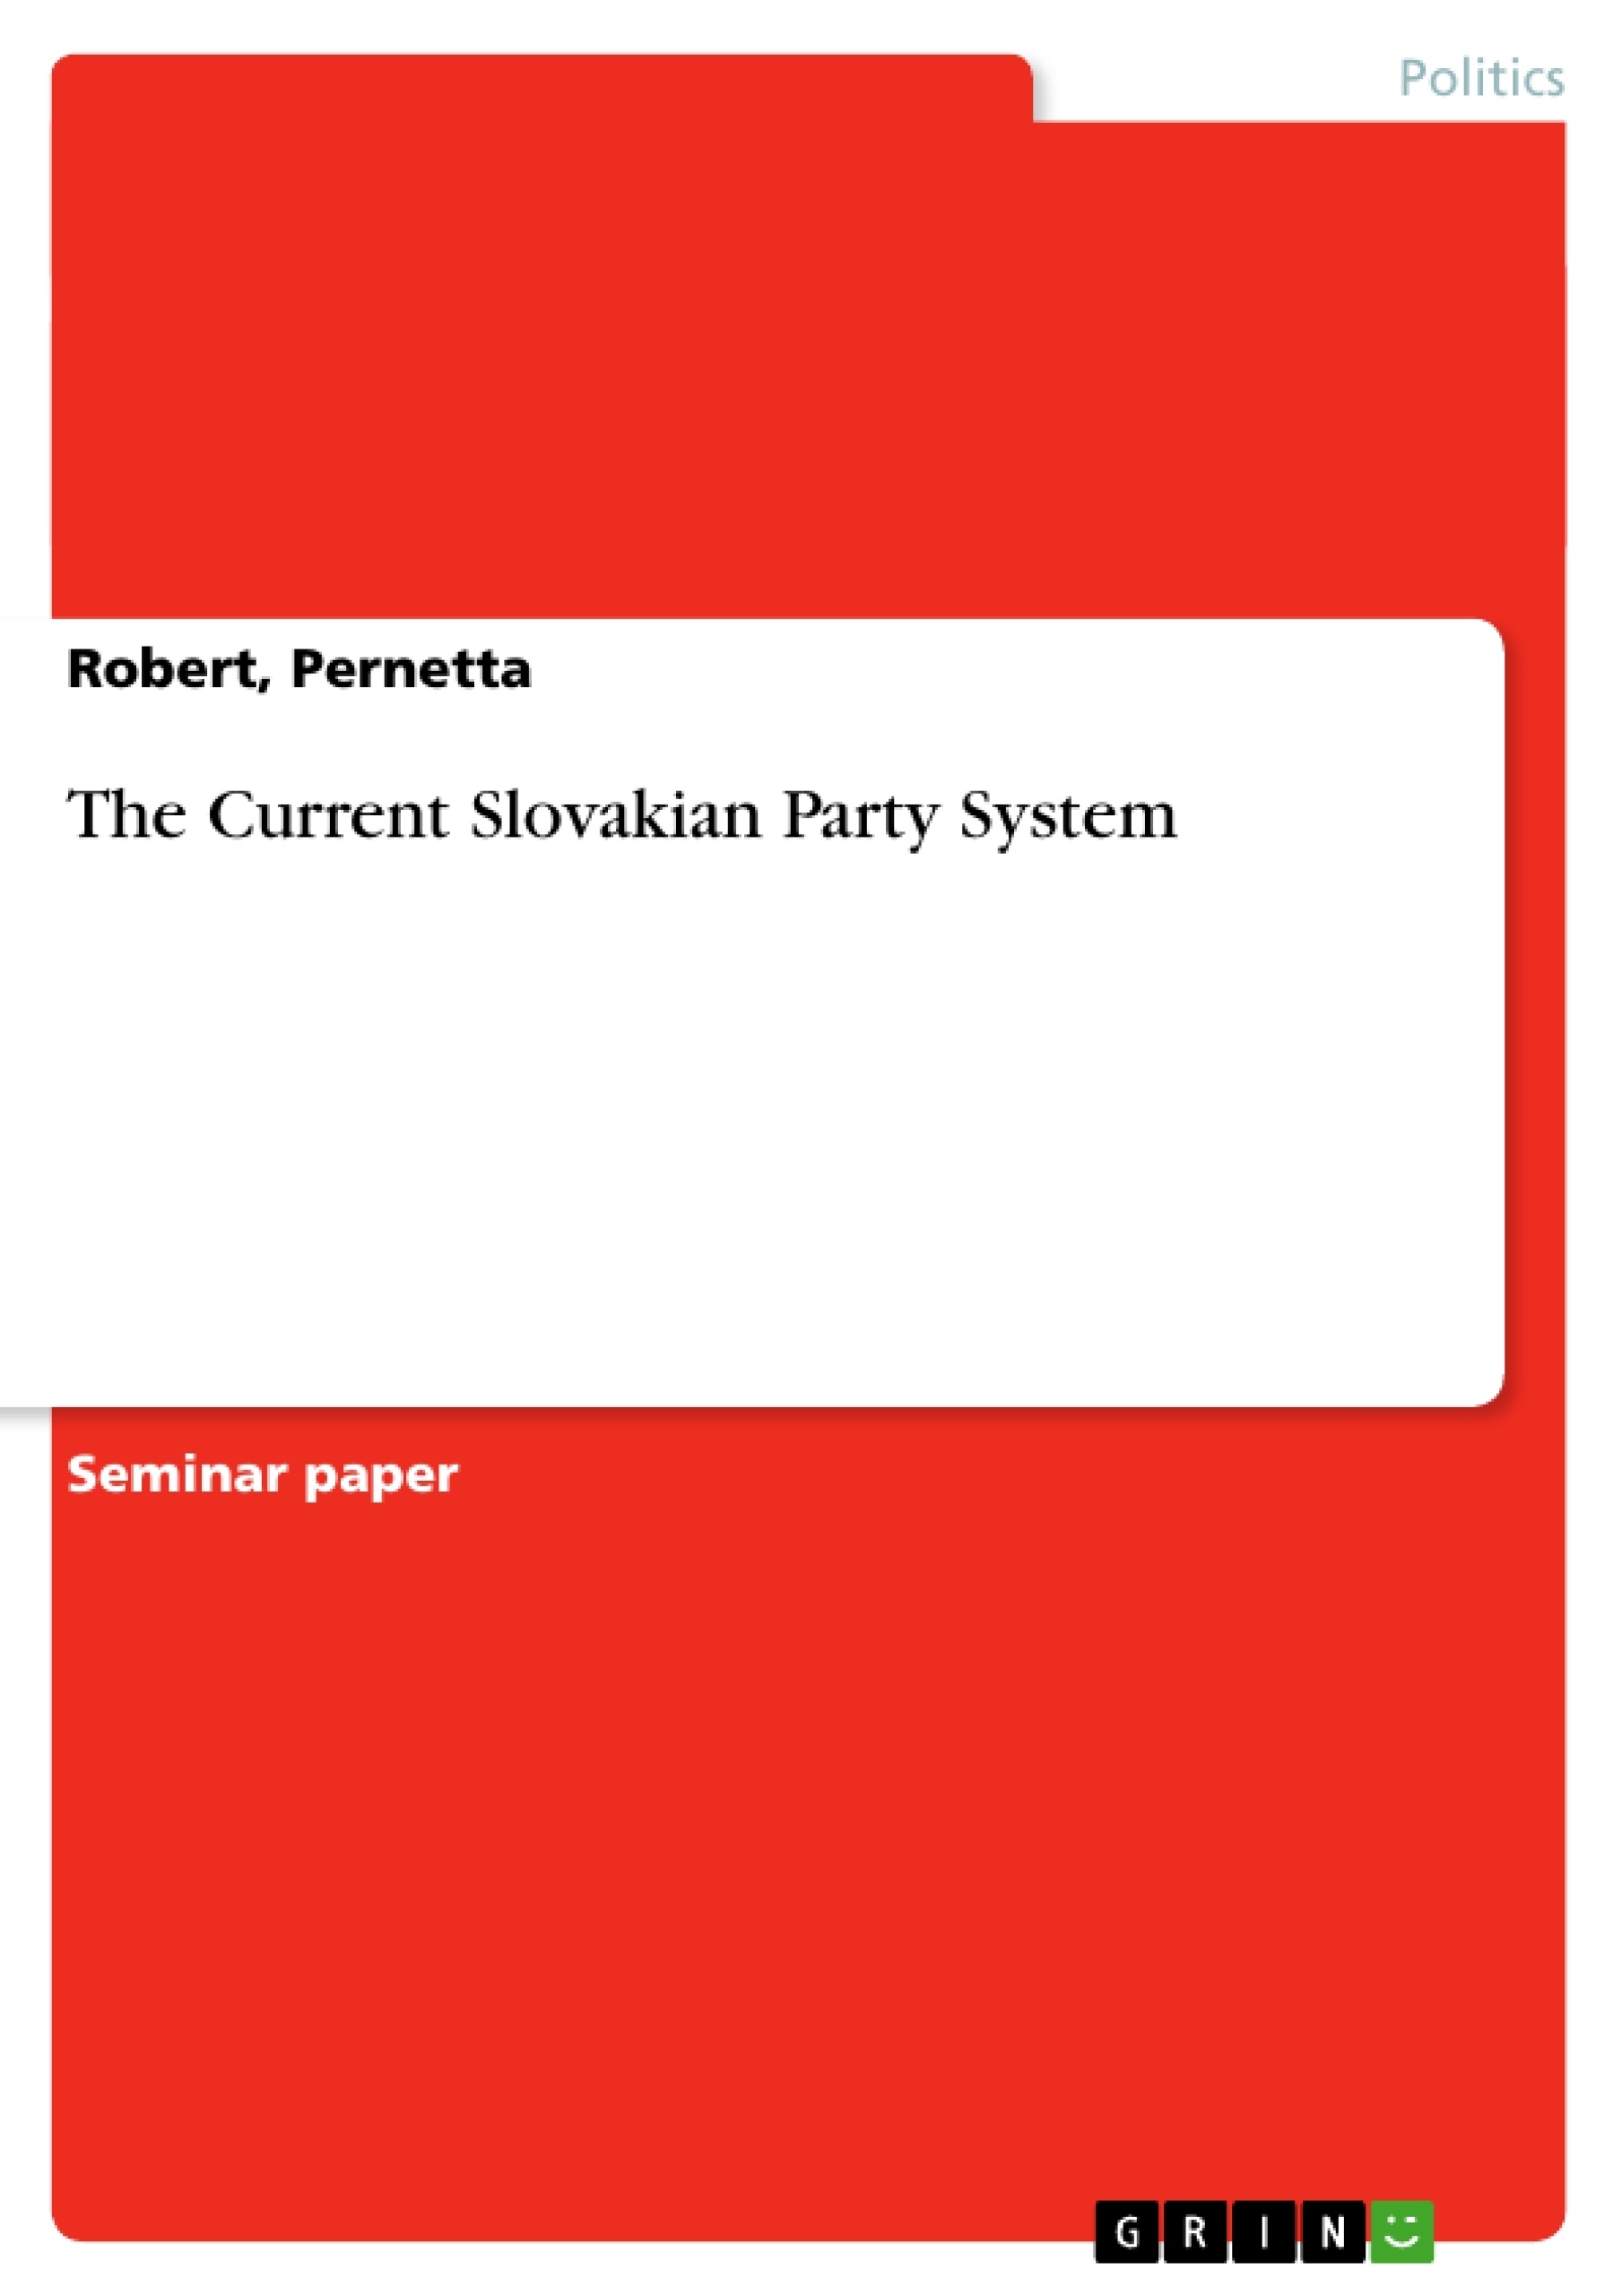 Title: The Current Slovakian Party System